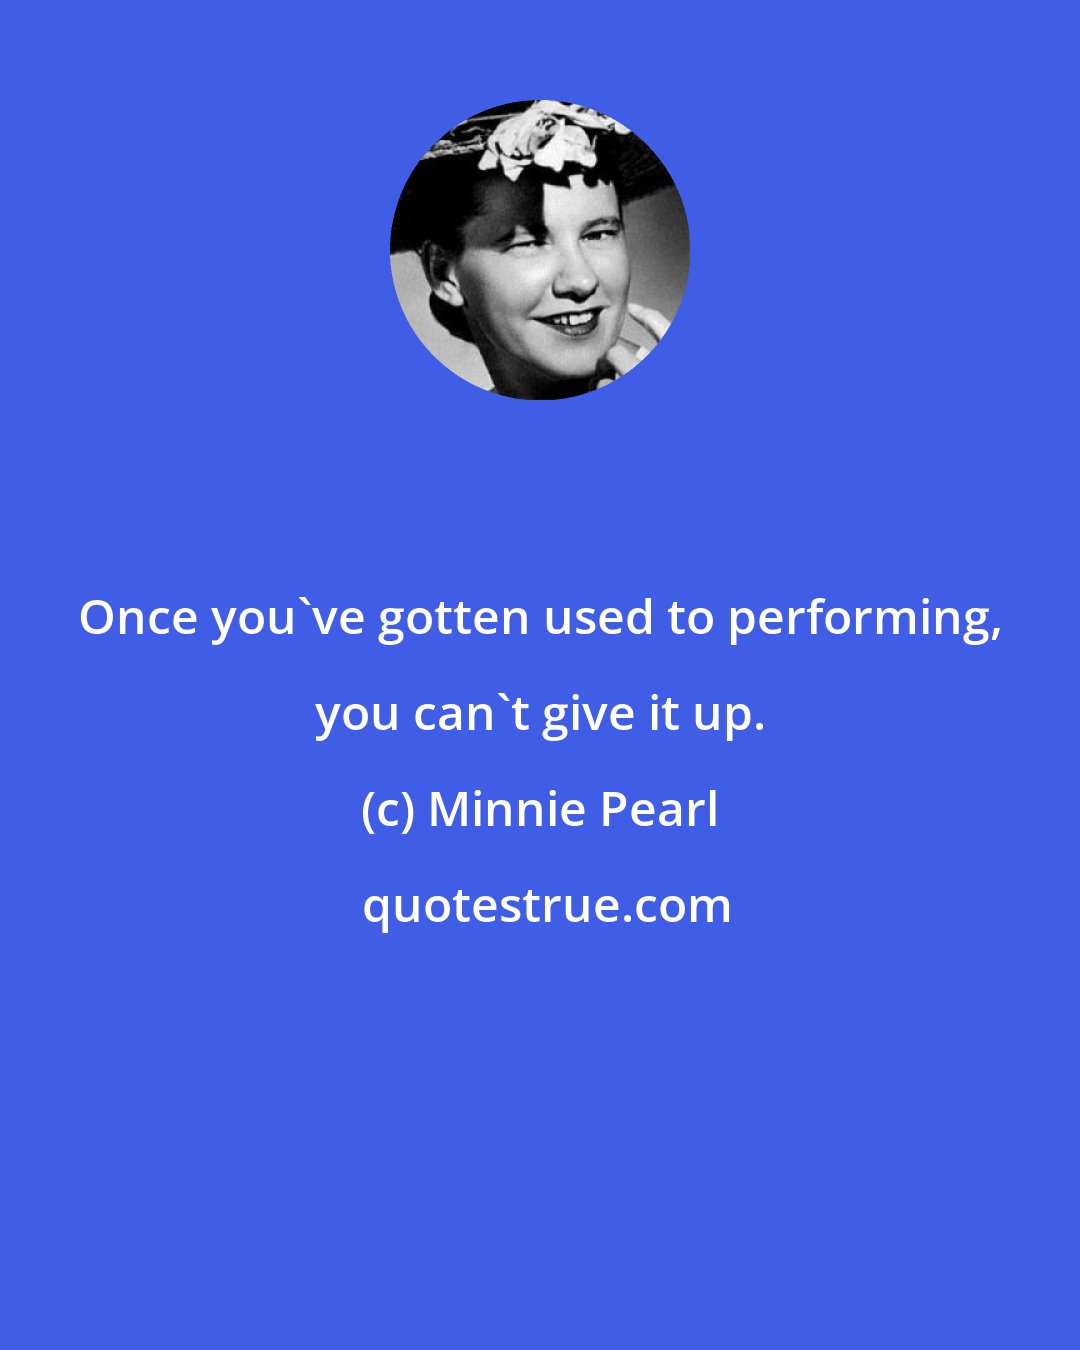 Minnie Pearl: Once you've gotten used to performing, you can't give it up.